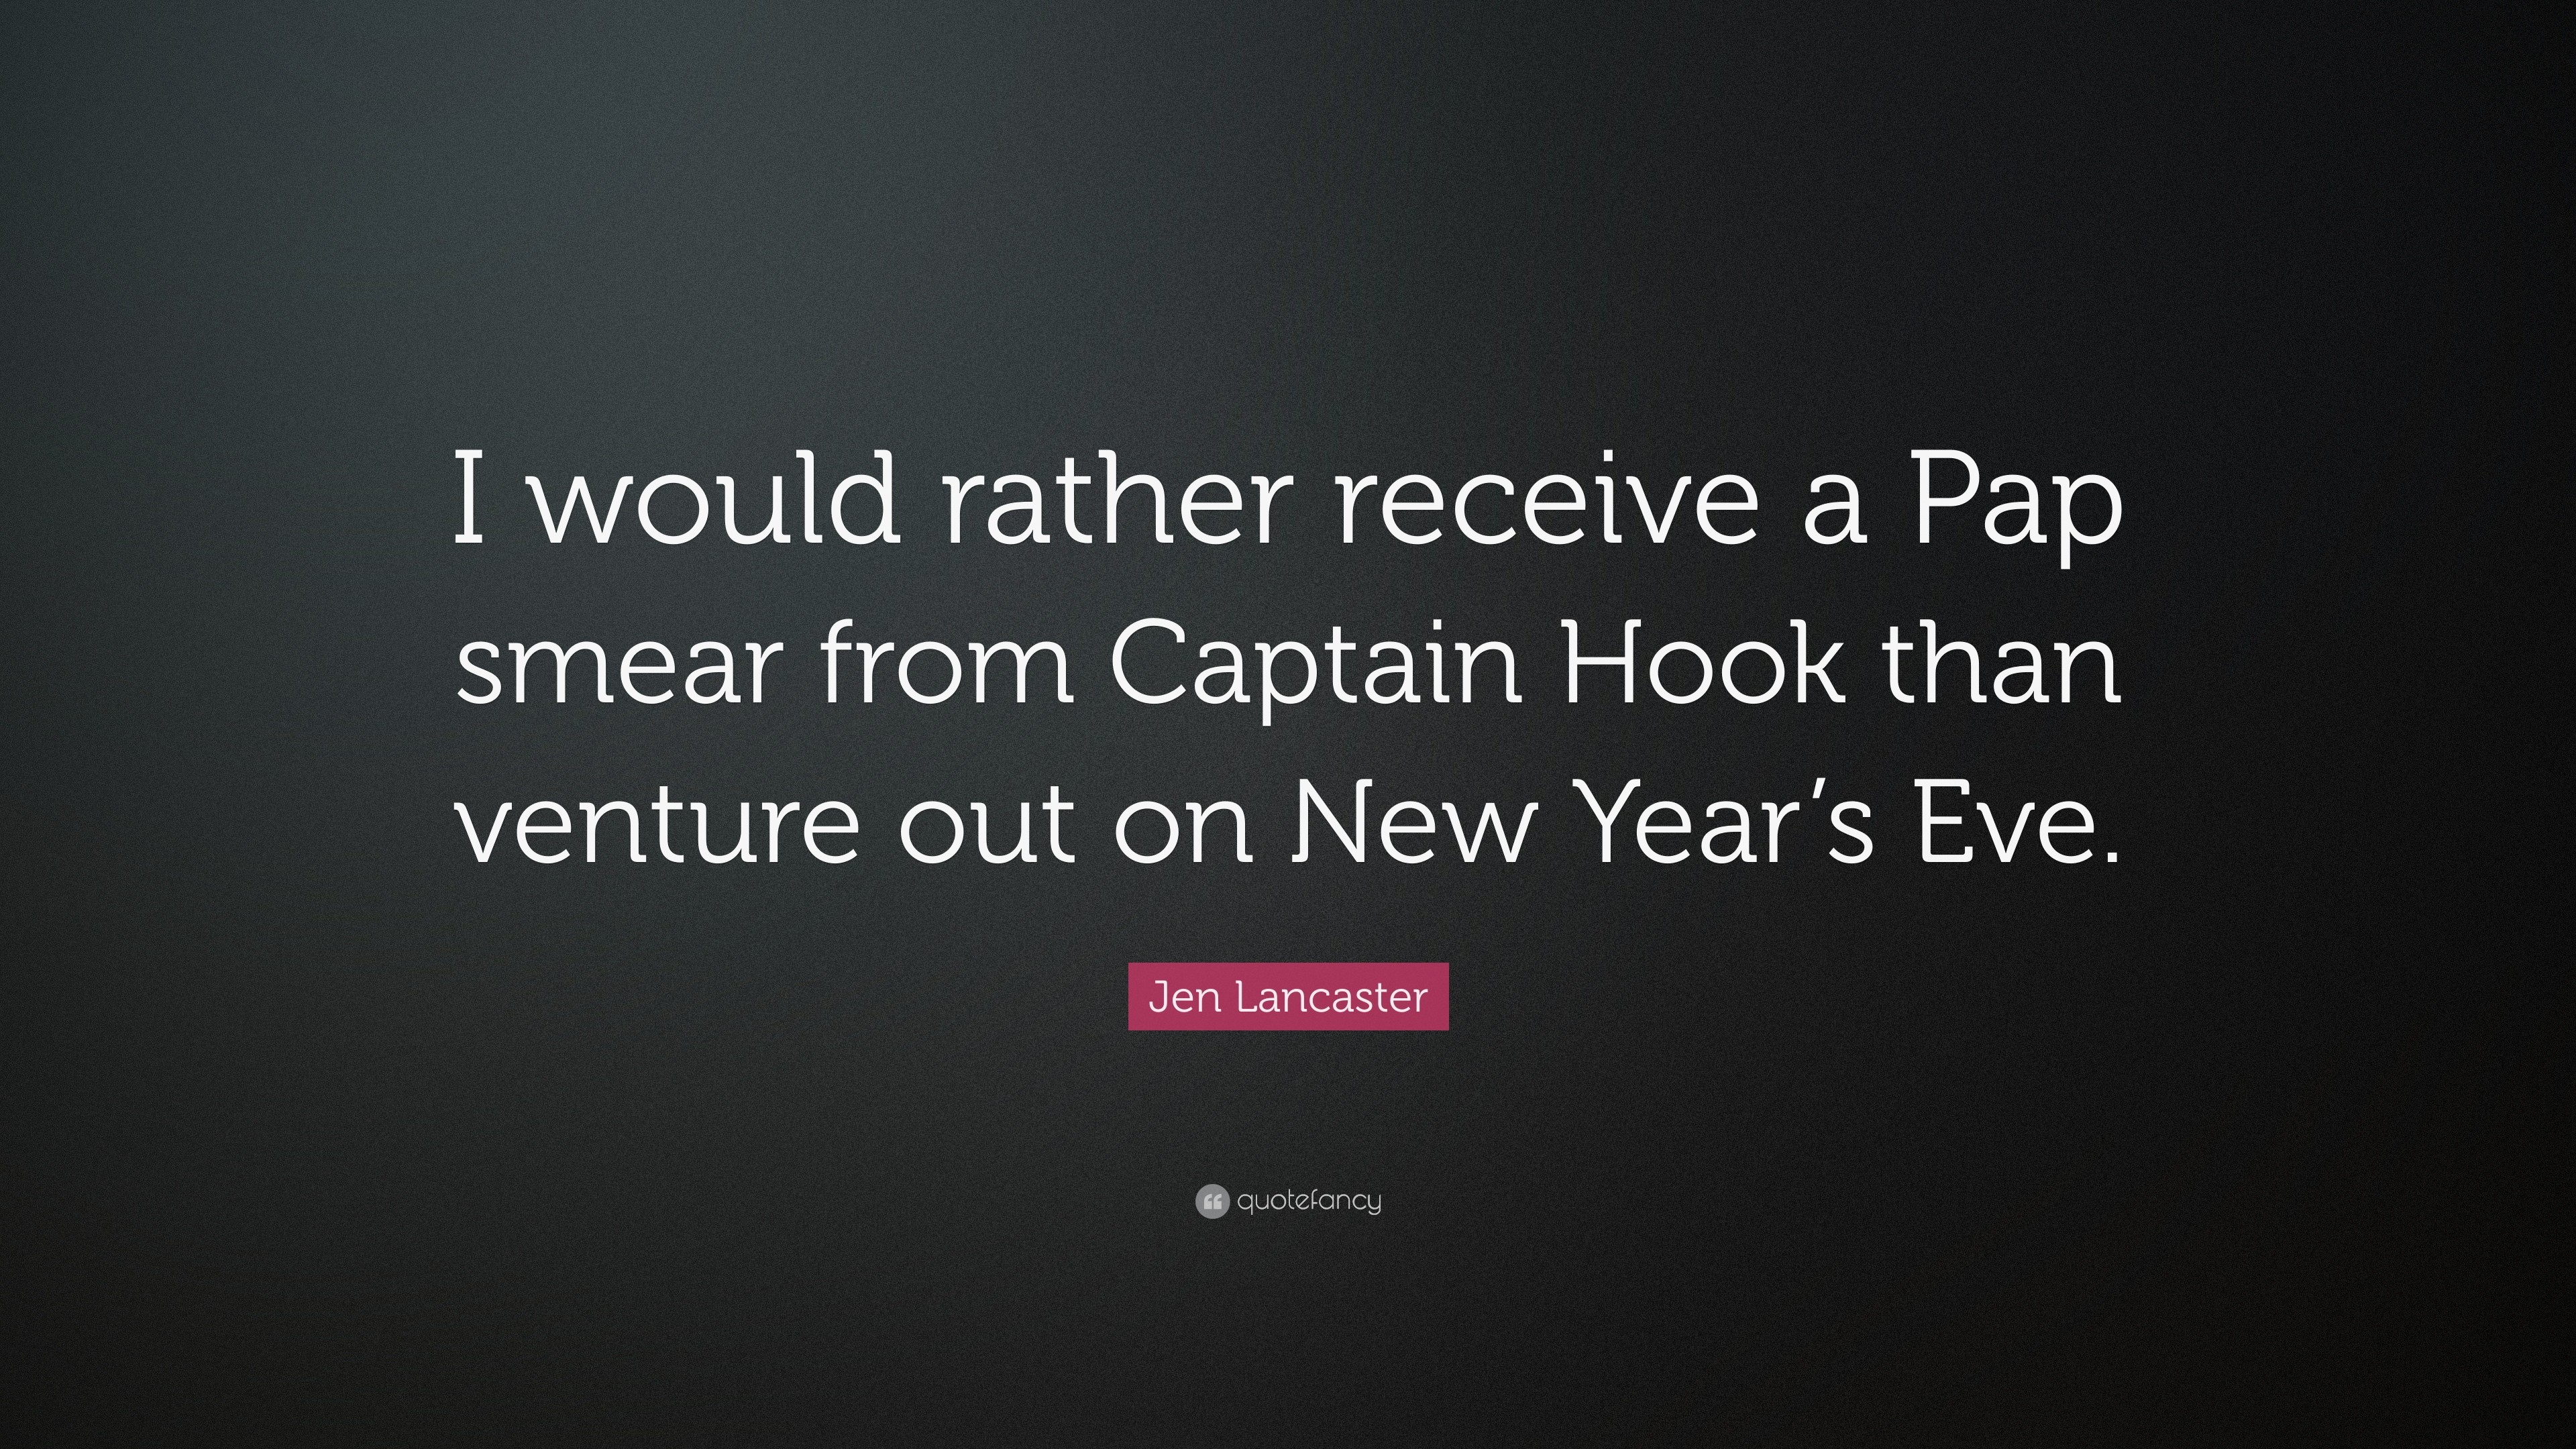 3840x2160 Jen Lancaster Quote: “I would rather receive a Pap smear from Captain Hook  than